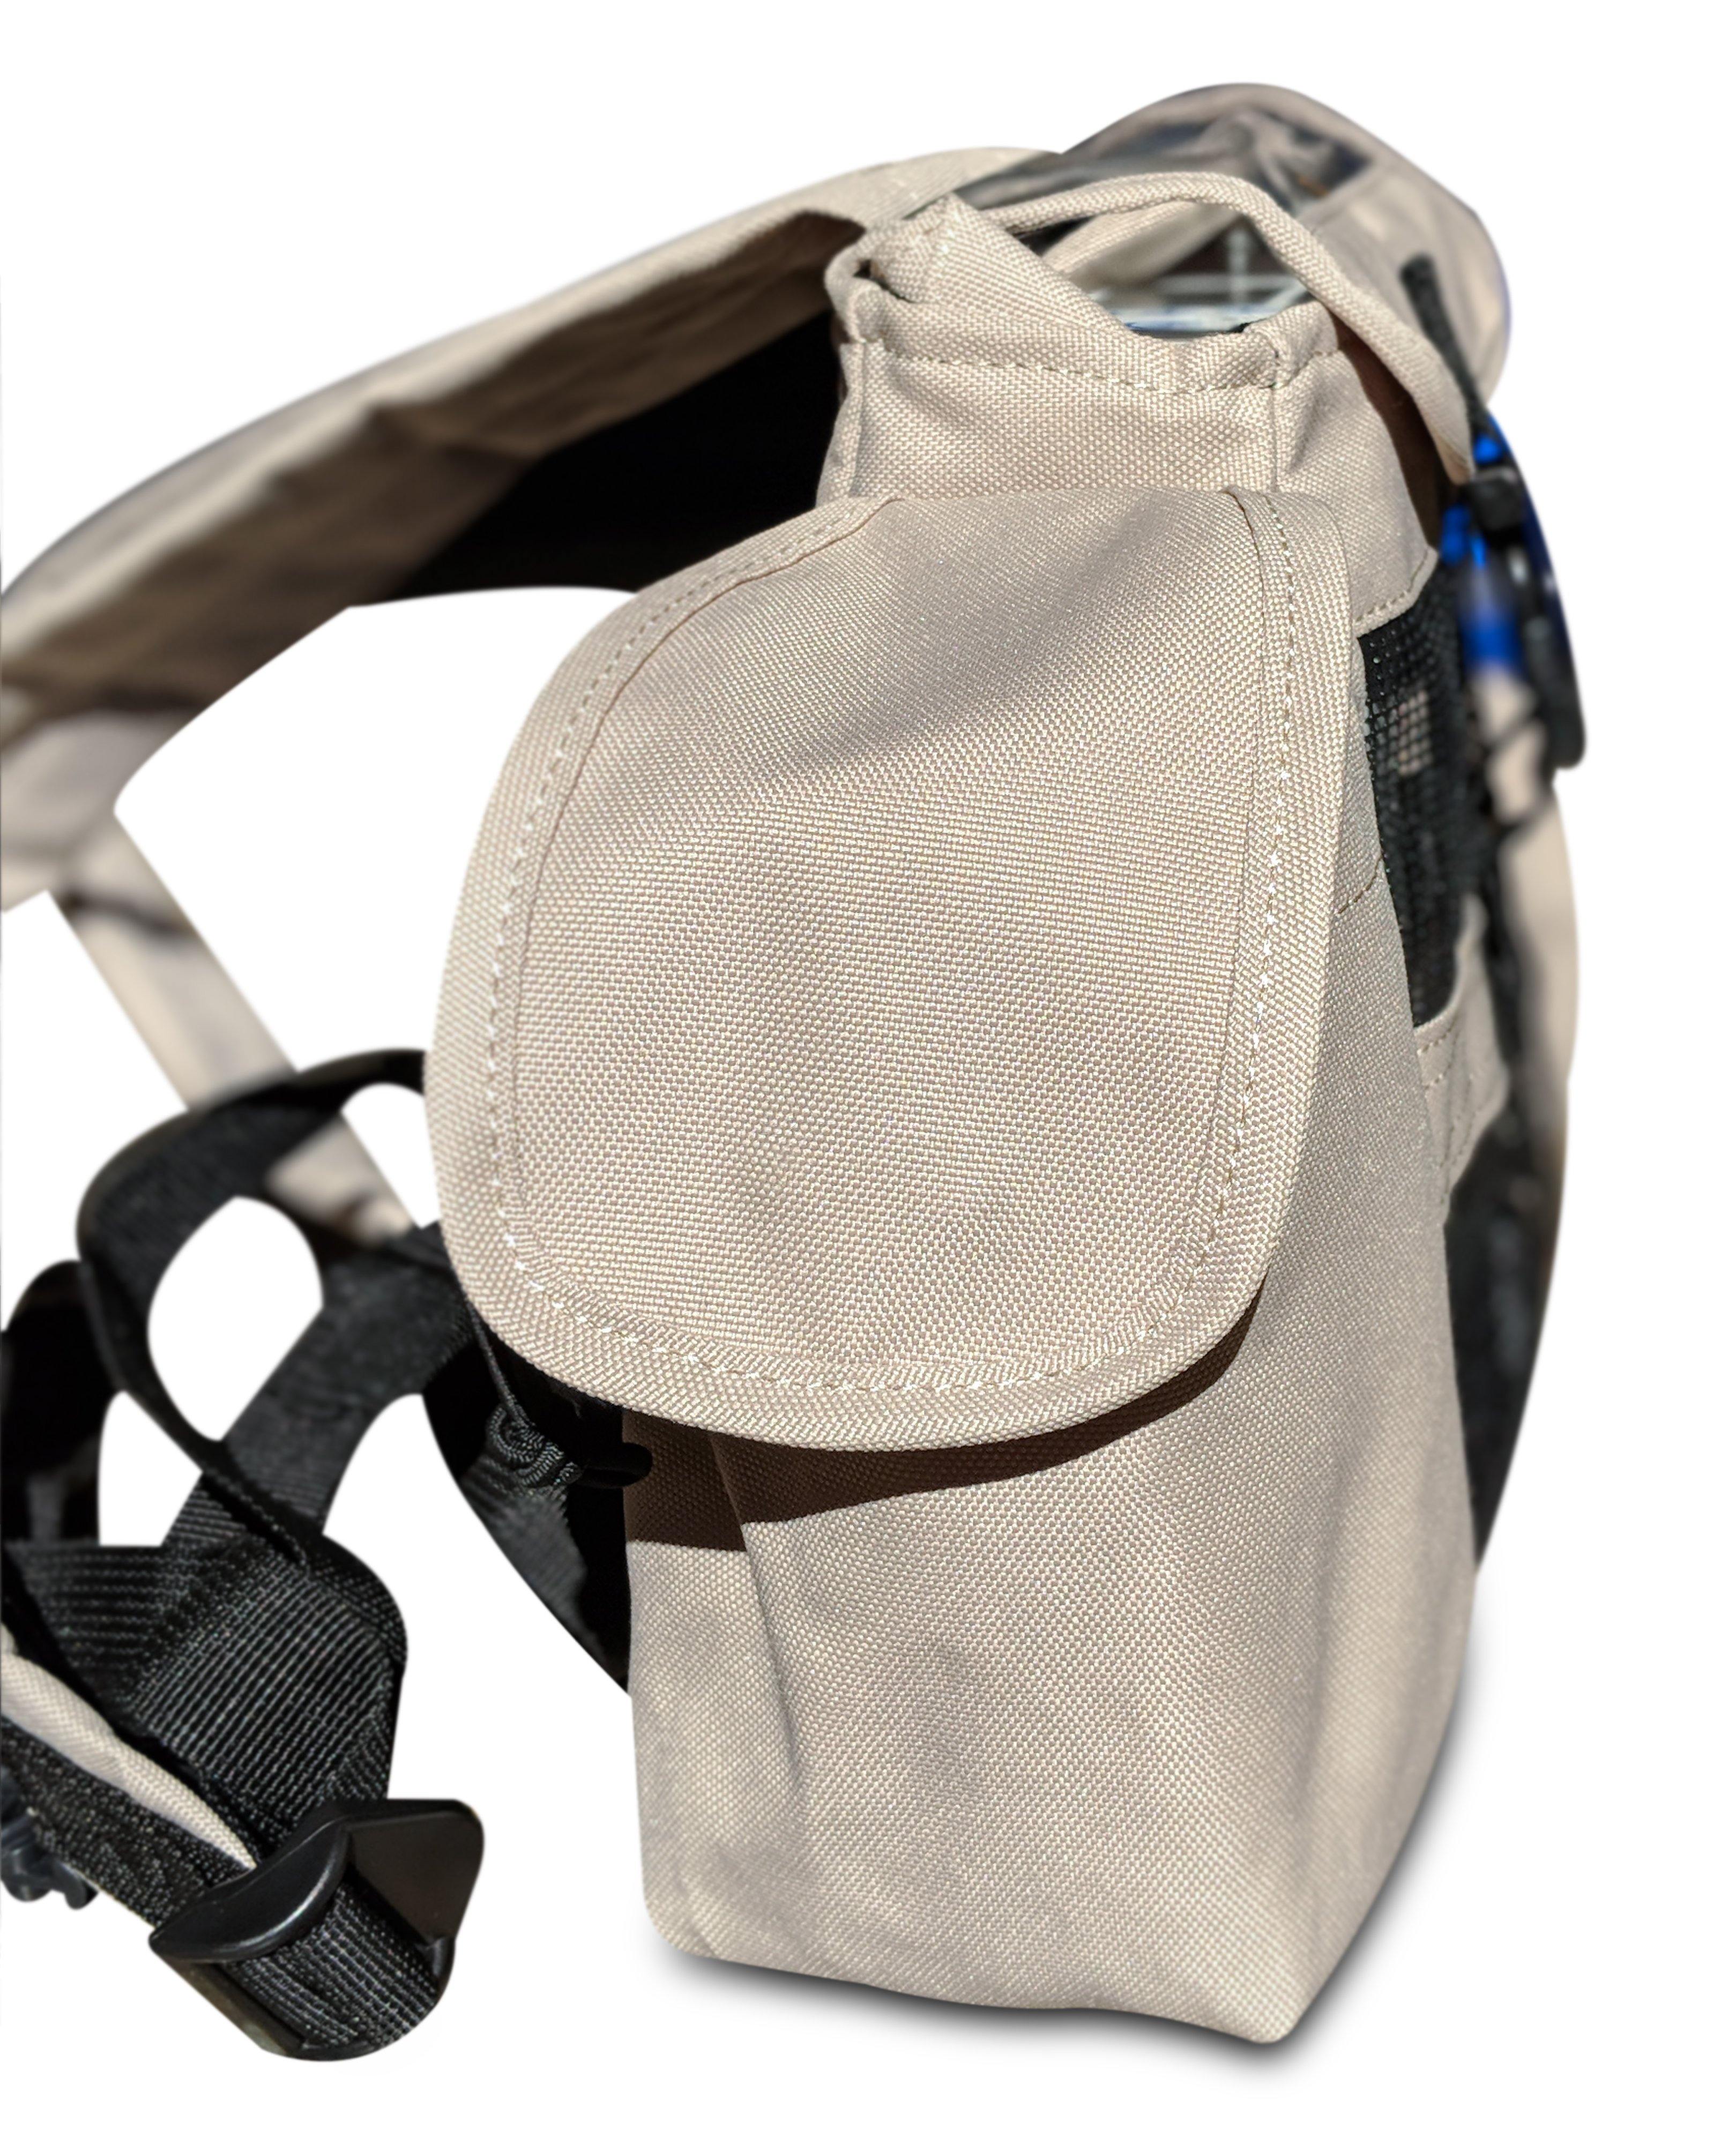 Inogen one g4 backpack in light tan - O2TOTES